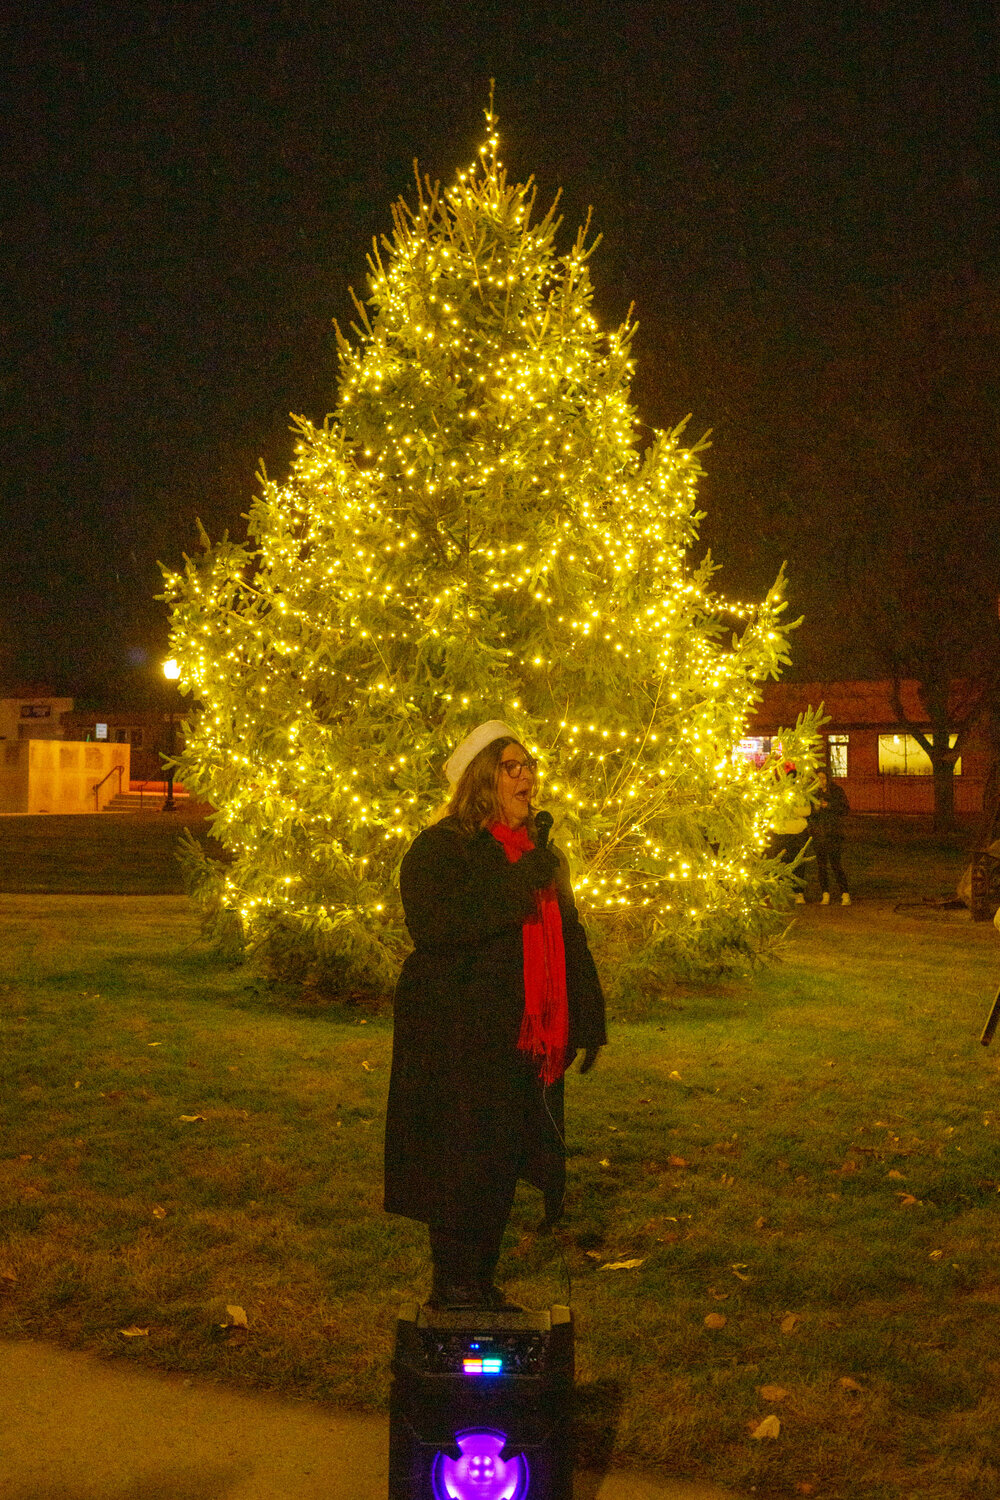 Mayor Mary Fasbender was the host for the tree lighting at City Hall on Saturday at the end of the Holiday Hoopla